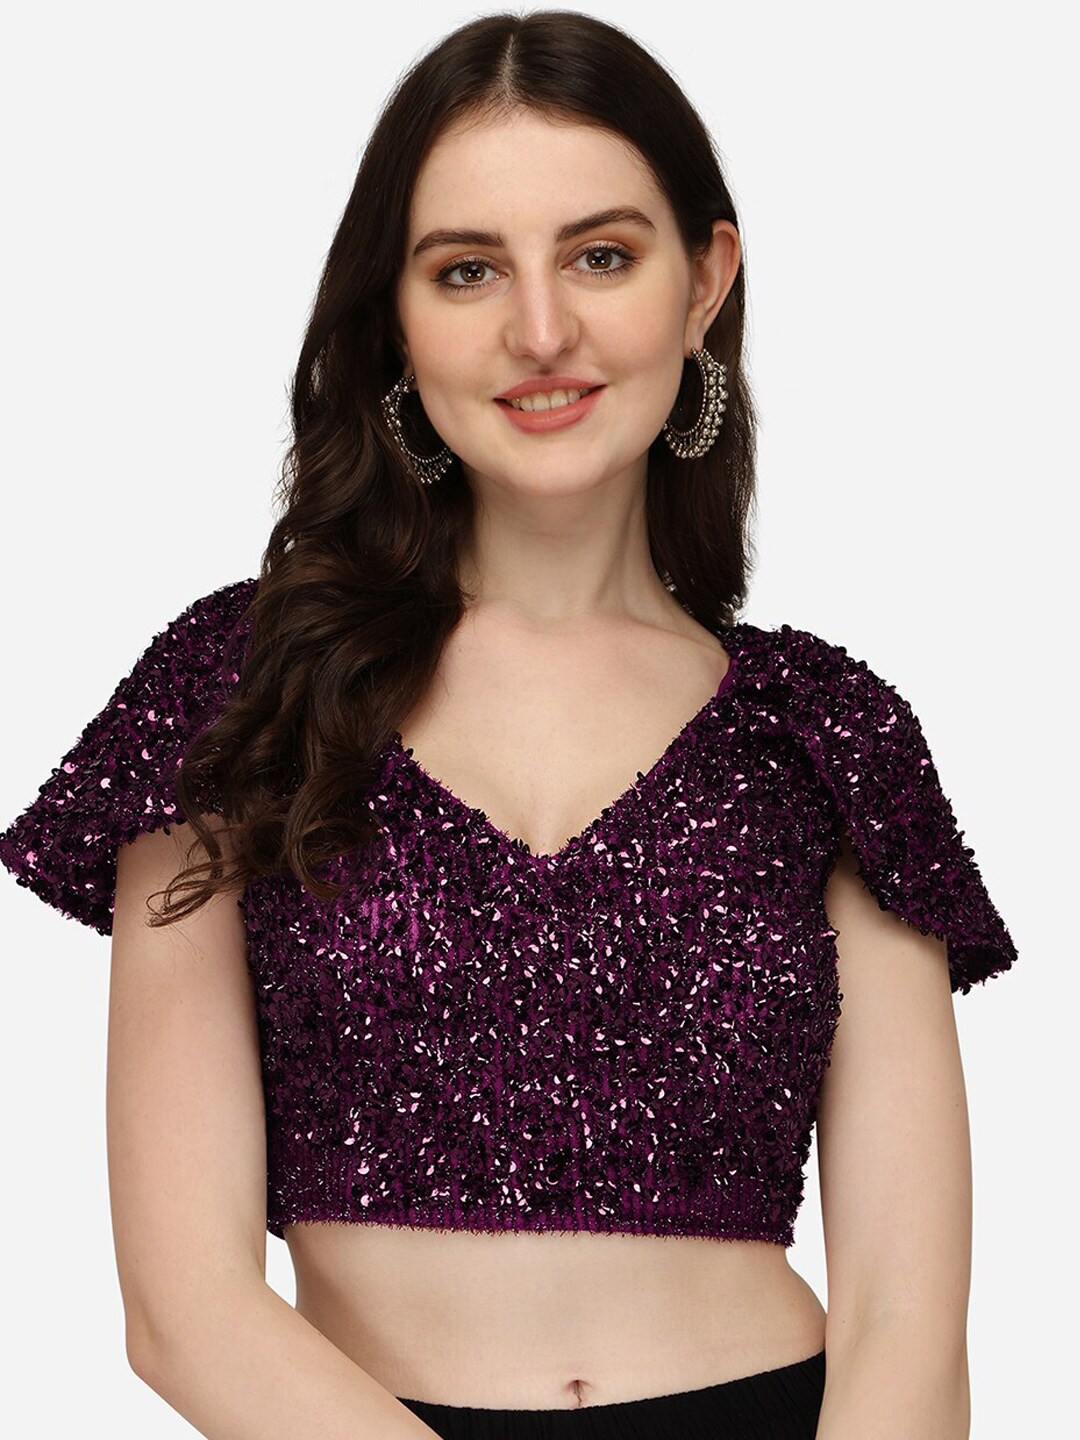 Sumaira Tex Women Violet Embroidered Padded Readymade Saree Blouse Price in India